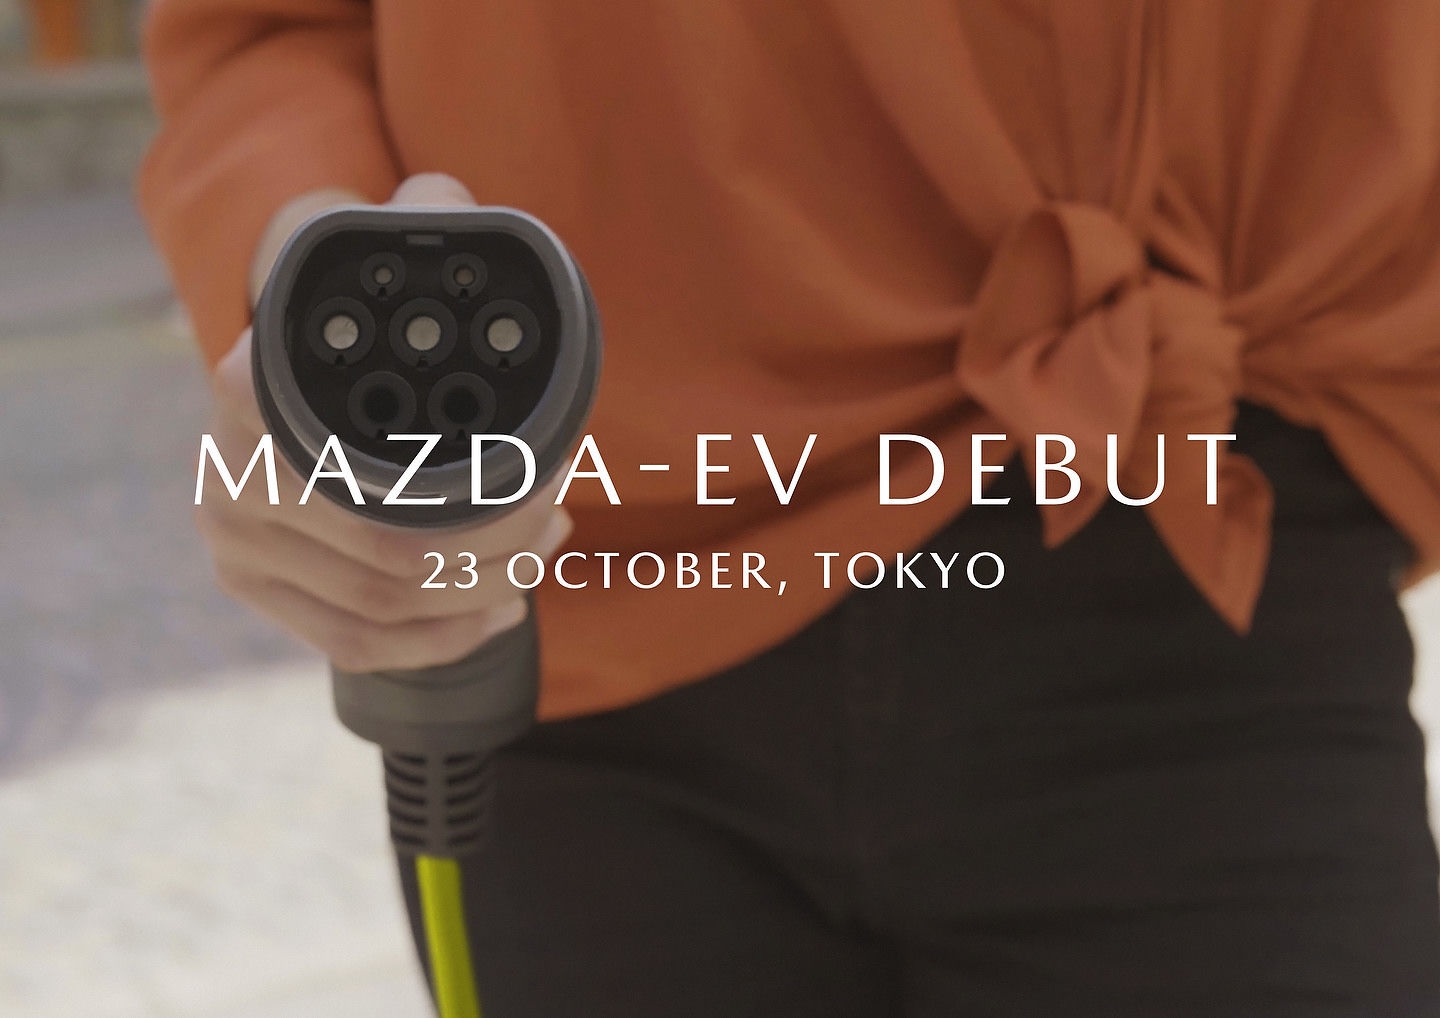 Mazda set to unveil new electric vehicle at Tokyo Motor Show